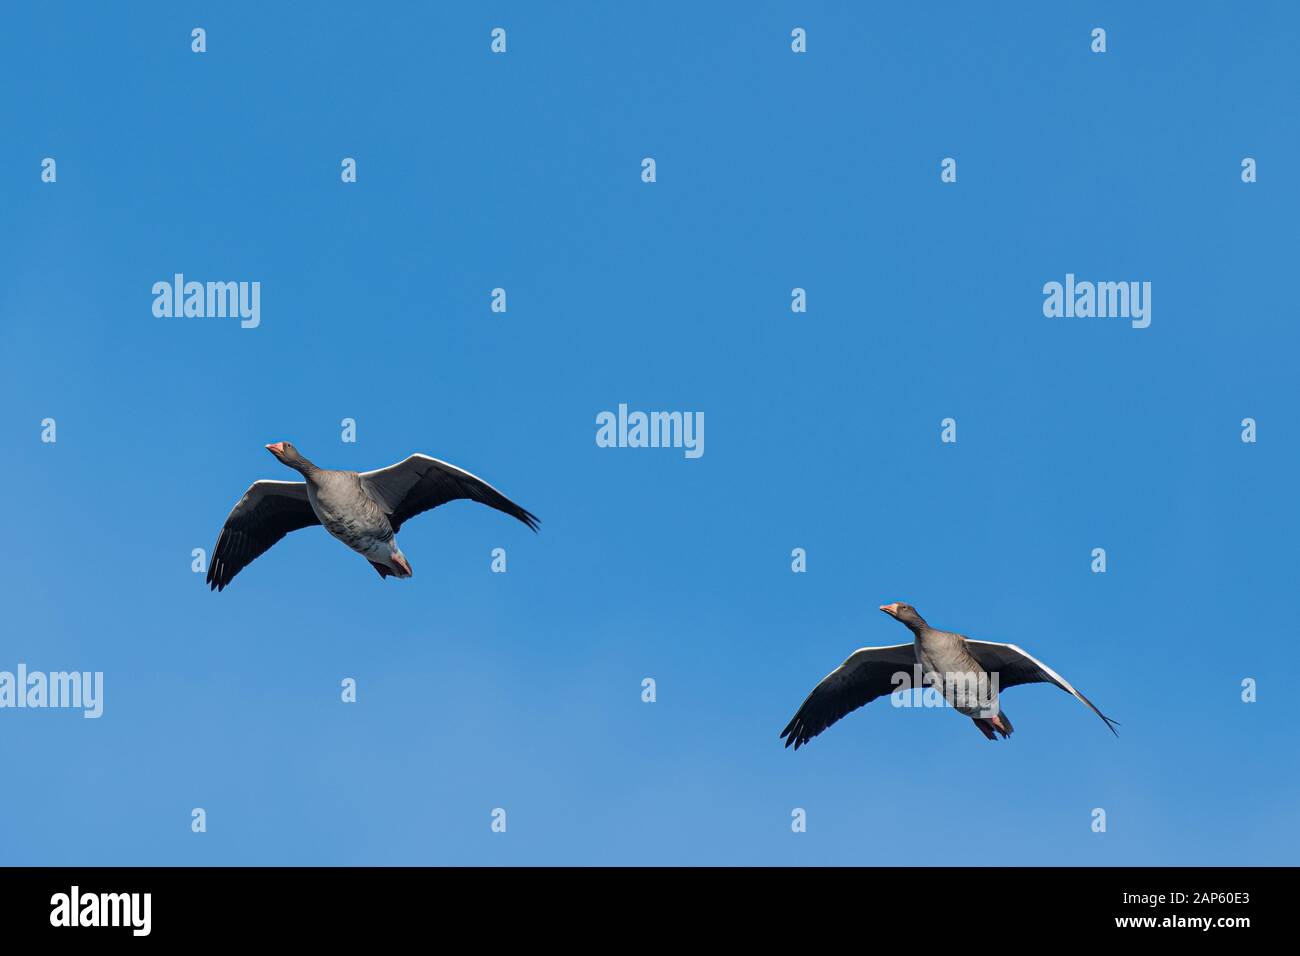 A flock of migrating greylag geese flying in formation against blue clear sky. Italy Stock Photo